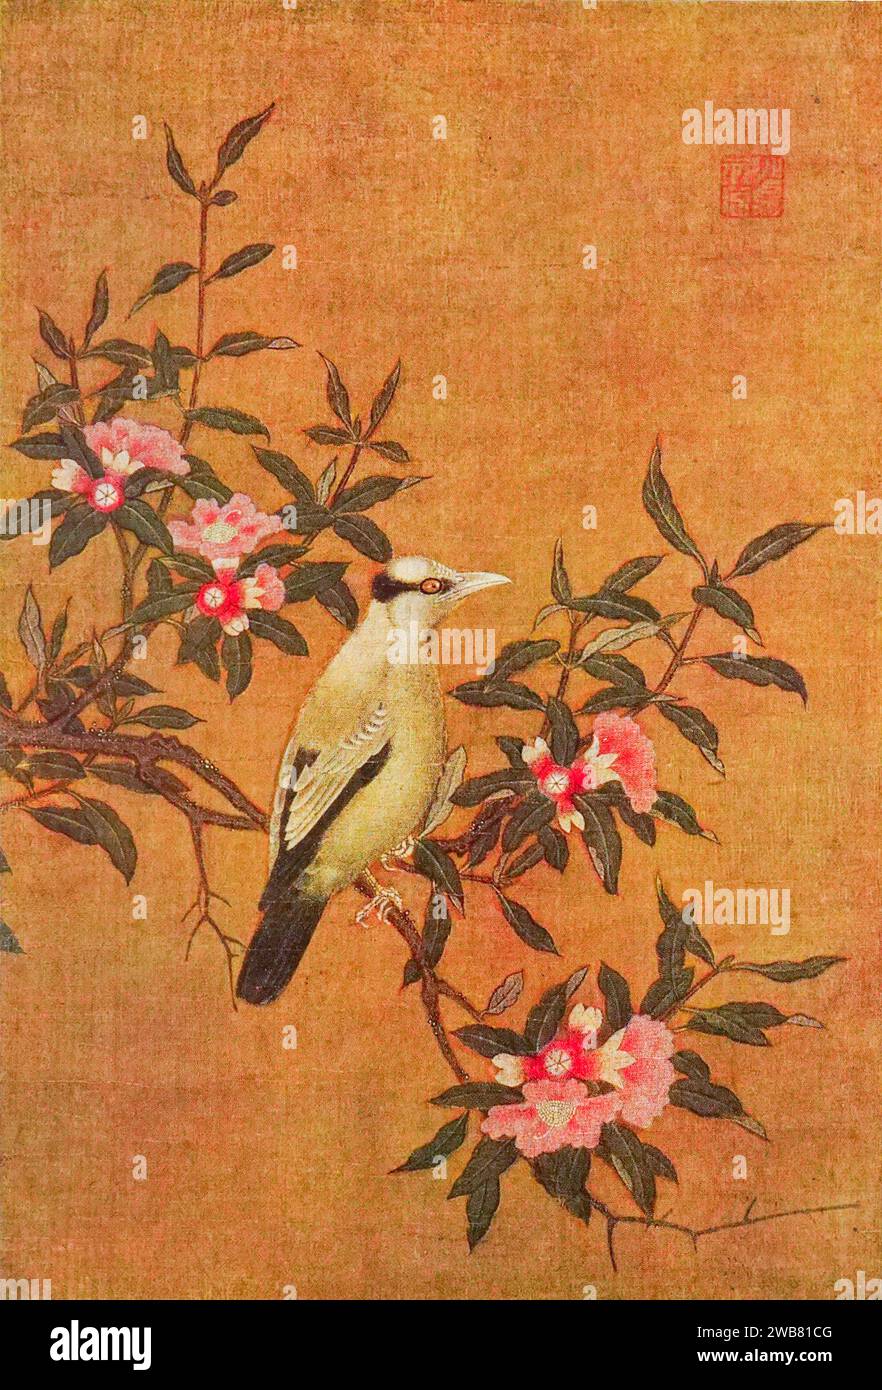 Bird on bough. Attributed to Wang Jo-shun. 50 x 34 cm. from Chinese art : one hundred plates in colour reproducing pottery & porcelain of all periods, jades, lacquer, paintings, bronzes, furniture, etc., etc. by   Hobson, R. L. (Robert Lockhart), 1872-1941 Publication date 1927 Publisher New York : The Macmillan Company Stock Photo